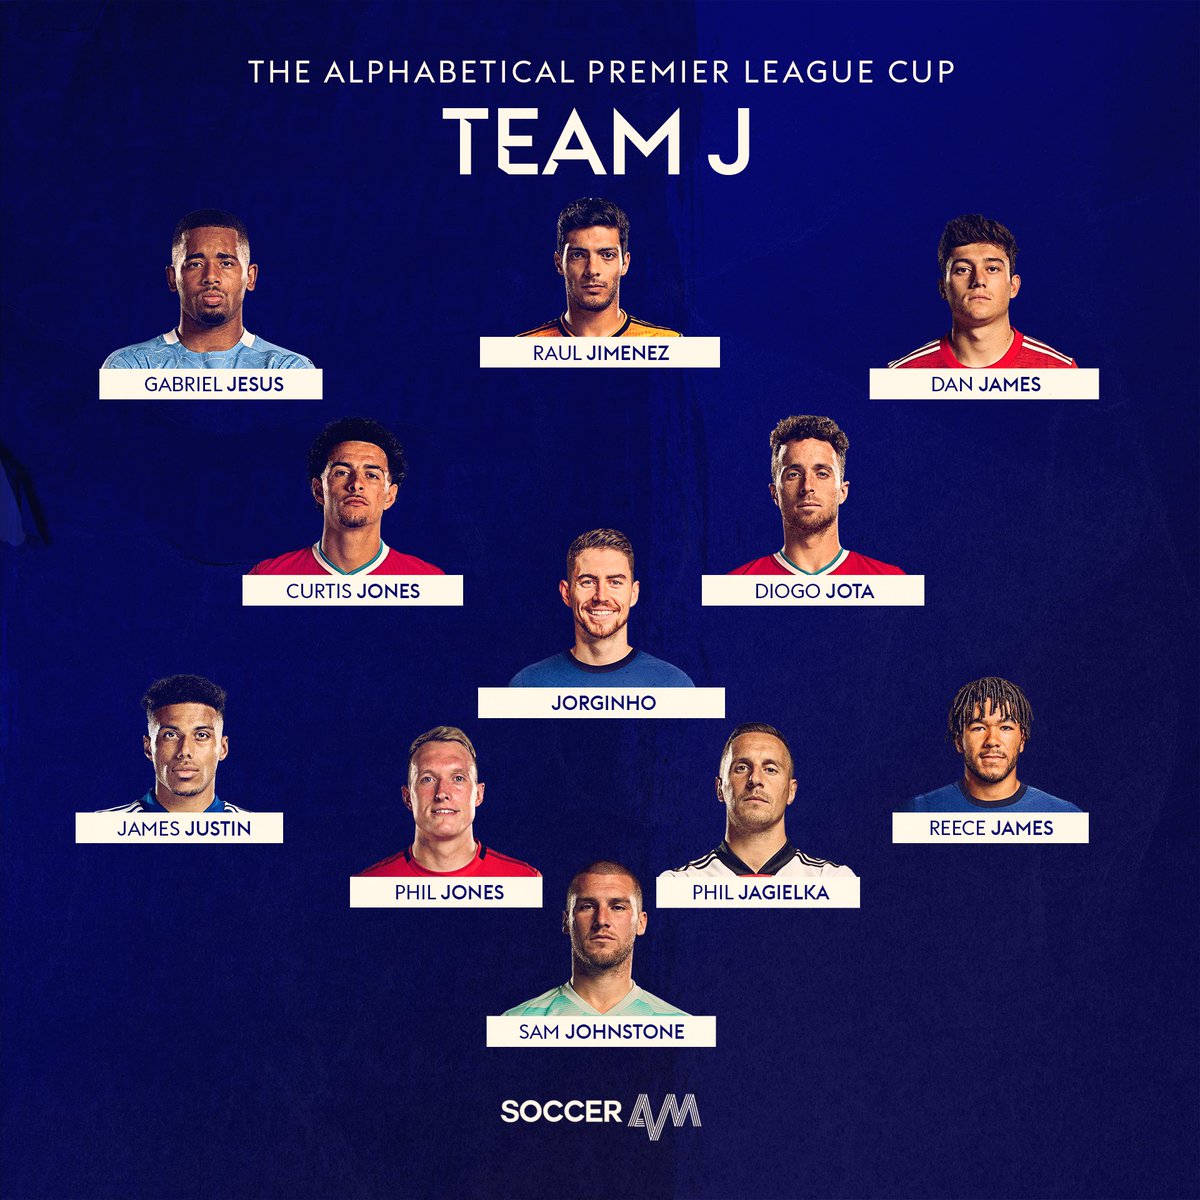 Team J Jota will provide goals from the midfield with Jorginho slotting balls for James to chase and supply Jimenez. Team J seem to have it all. Star man: Diogo Jota Captain: Phil Jagielka